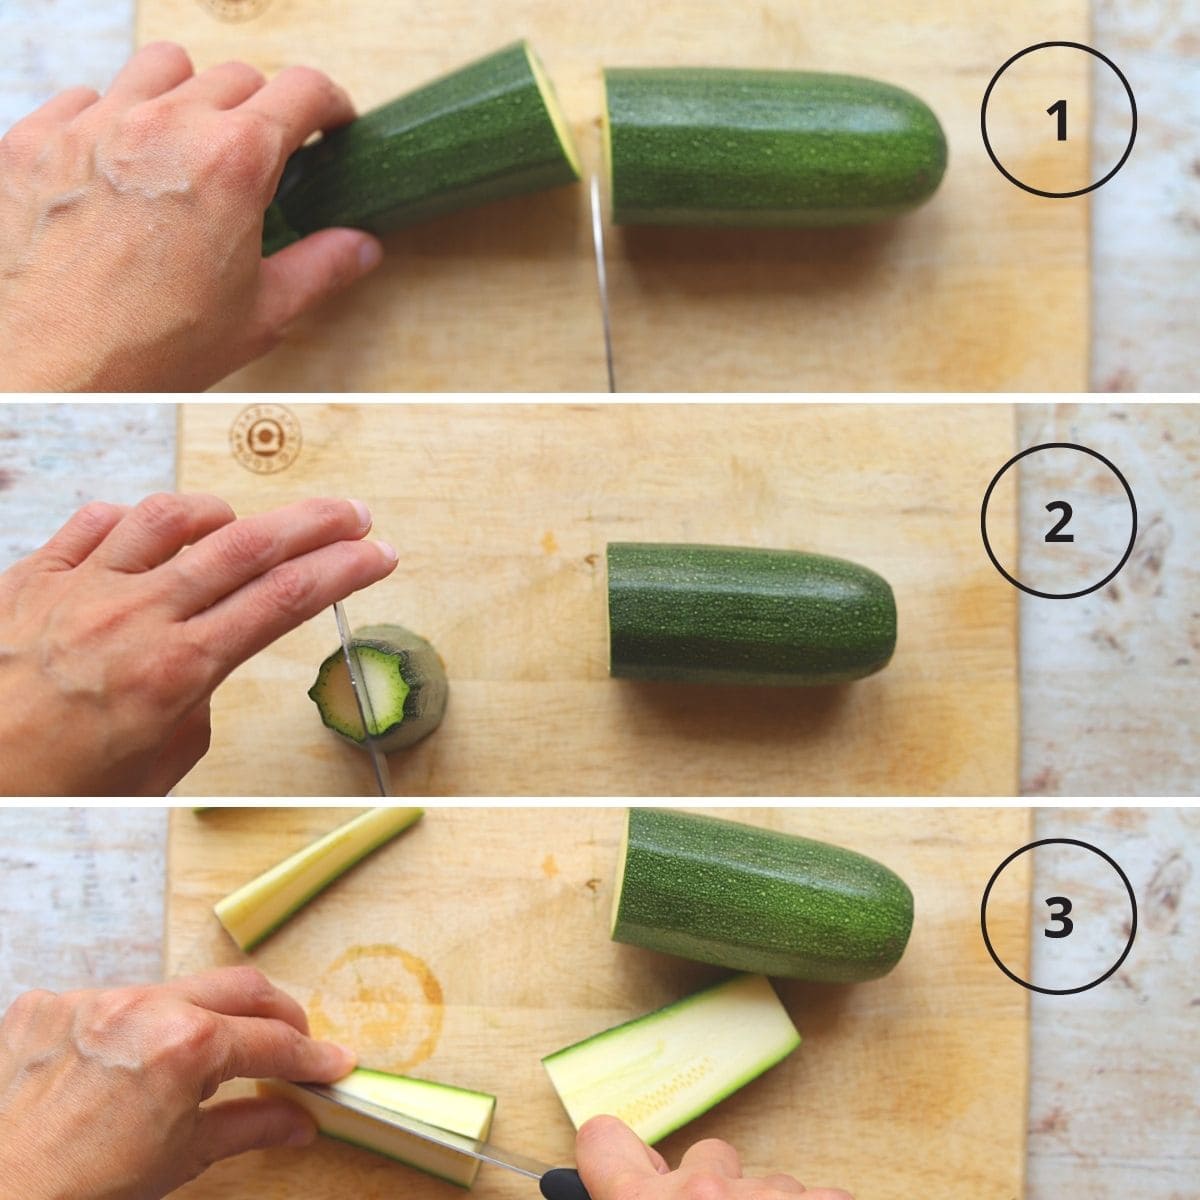 Three images showing cutting a zucchini into thin spears.